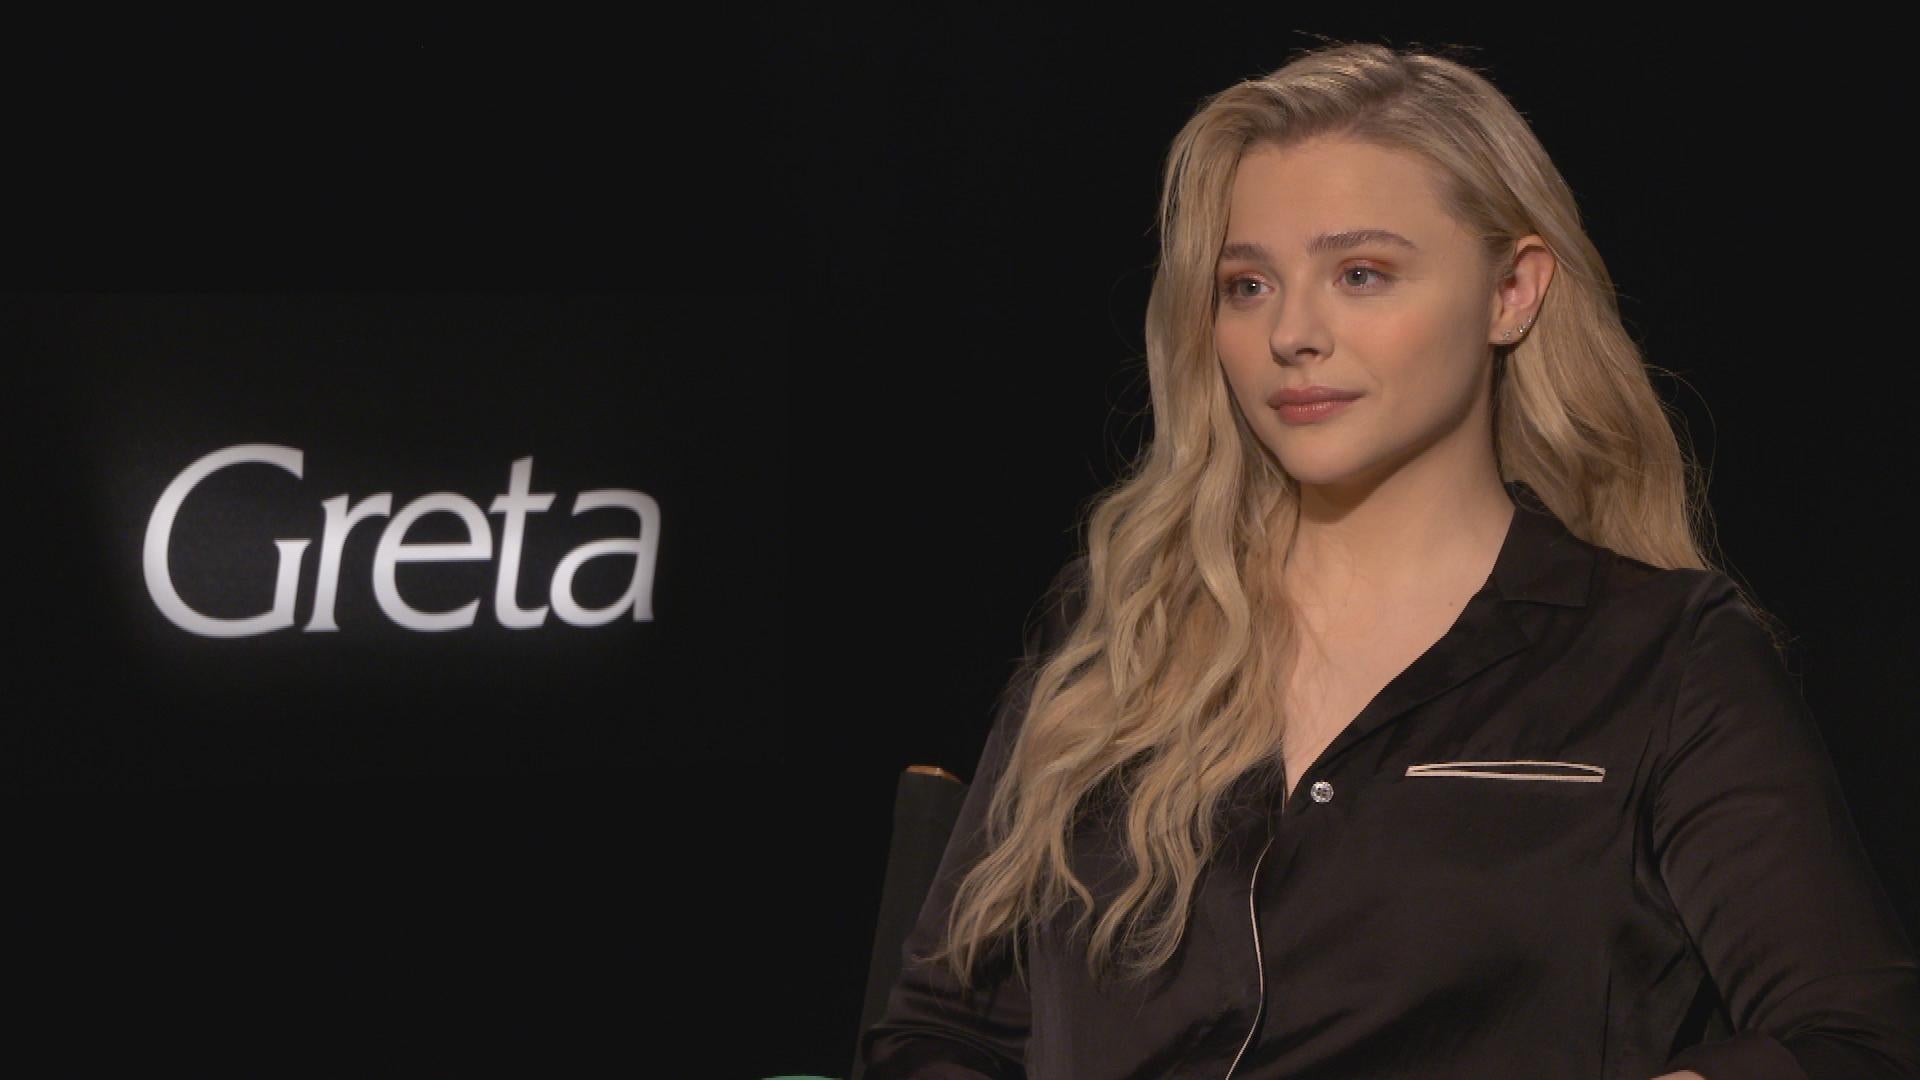 Chloe Grace Moretz opens up about seeking therapy after Family Guy